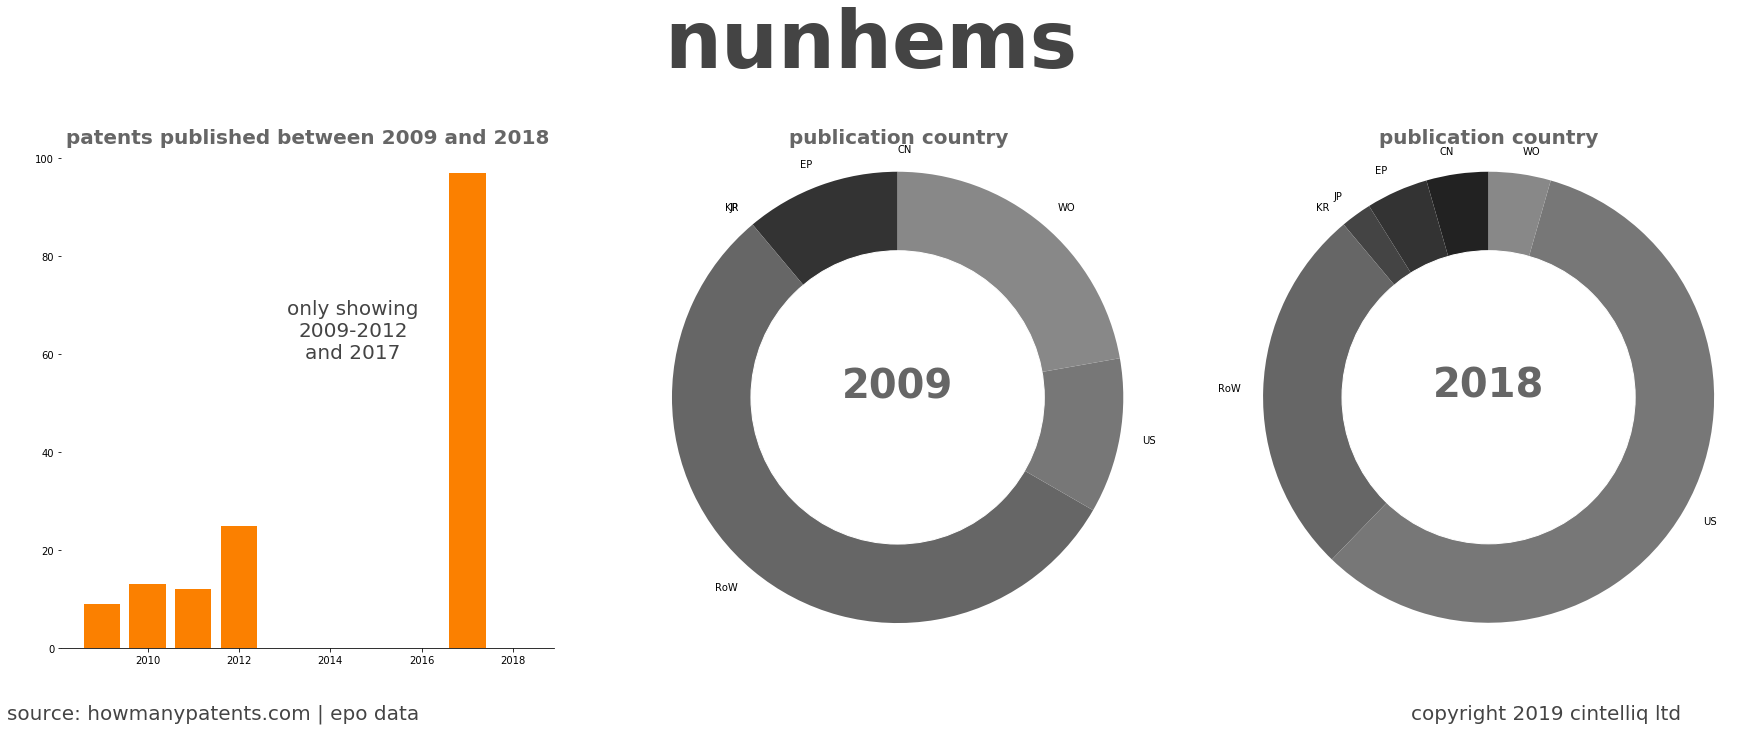 summary of patents for Nunhems